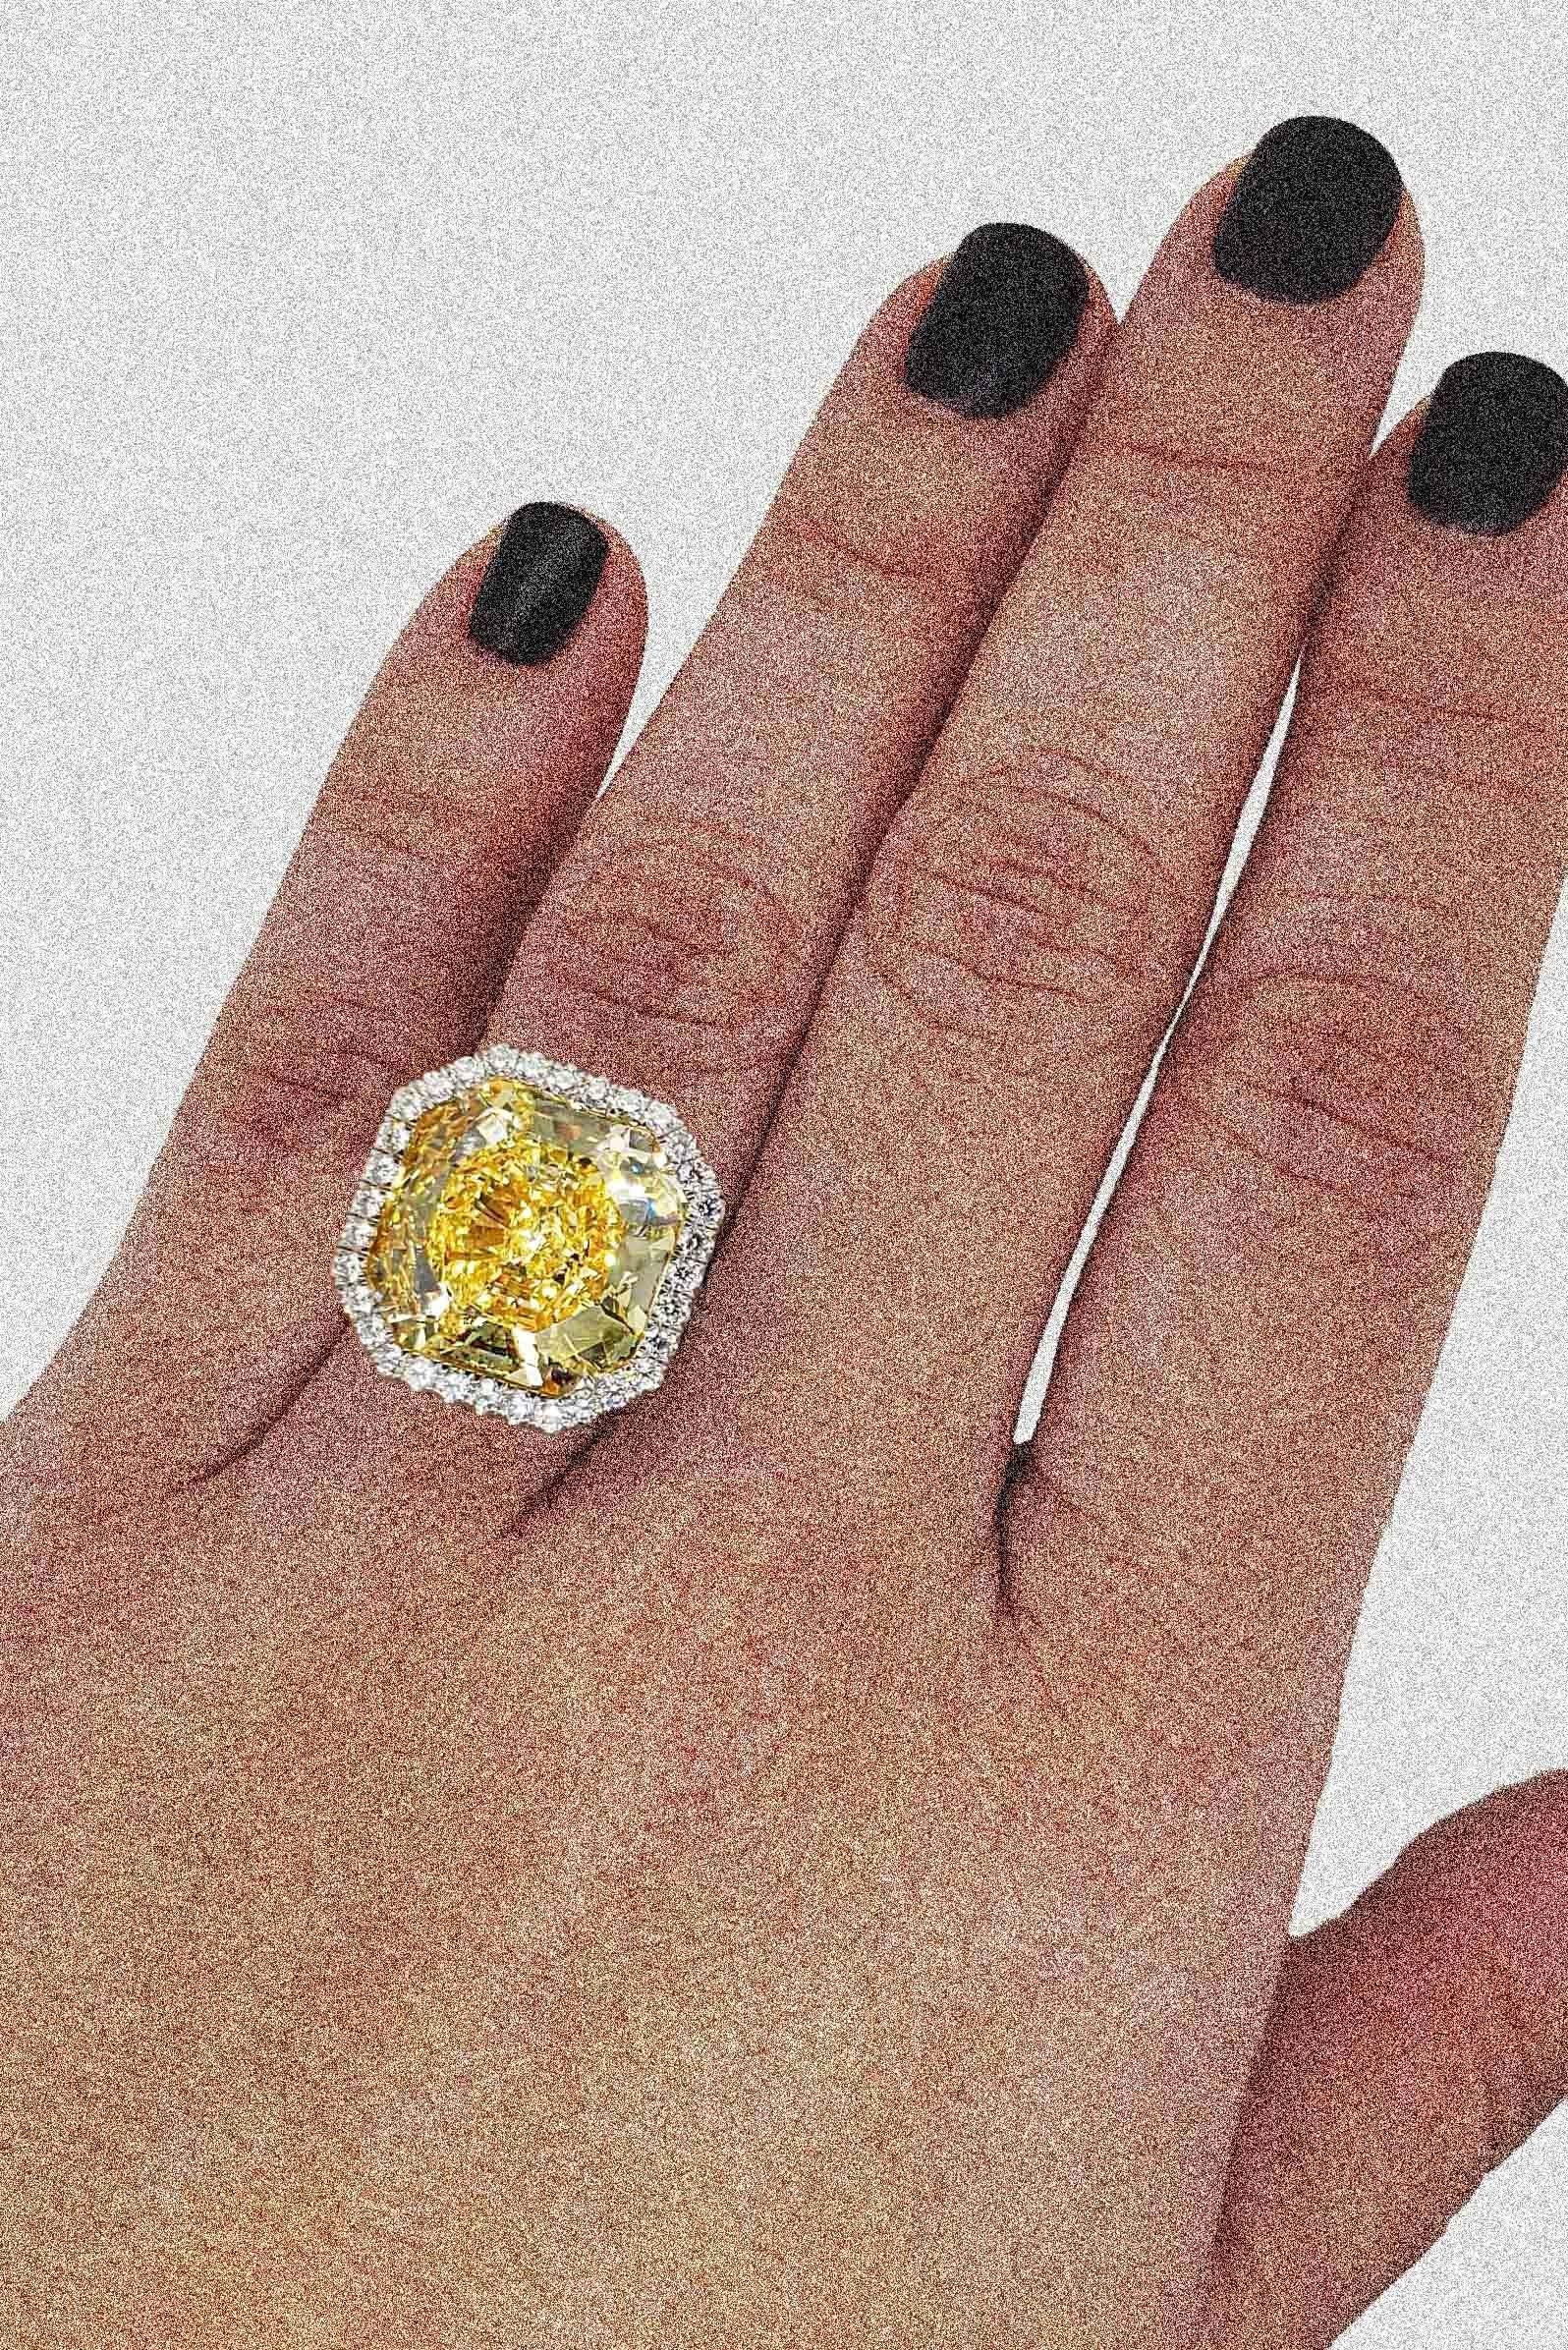 One of the most exquisite diamond rings ever from Gail Jewelers  @gailjewelers ! Here is a dazzling 15-carat radiant-cut diamond ring full…  | Instagram